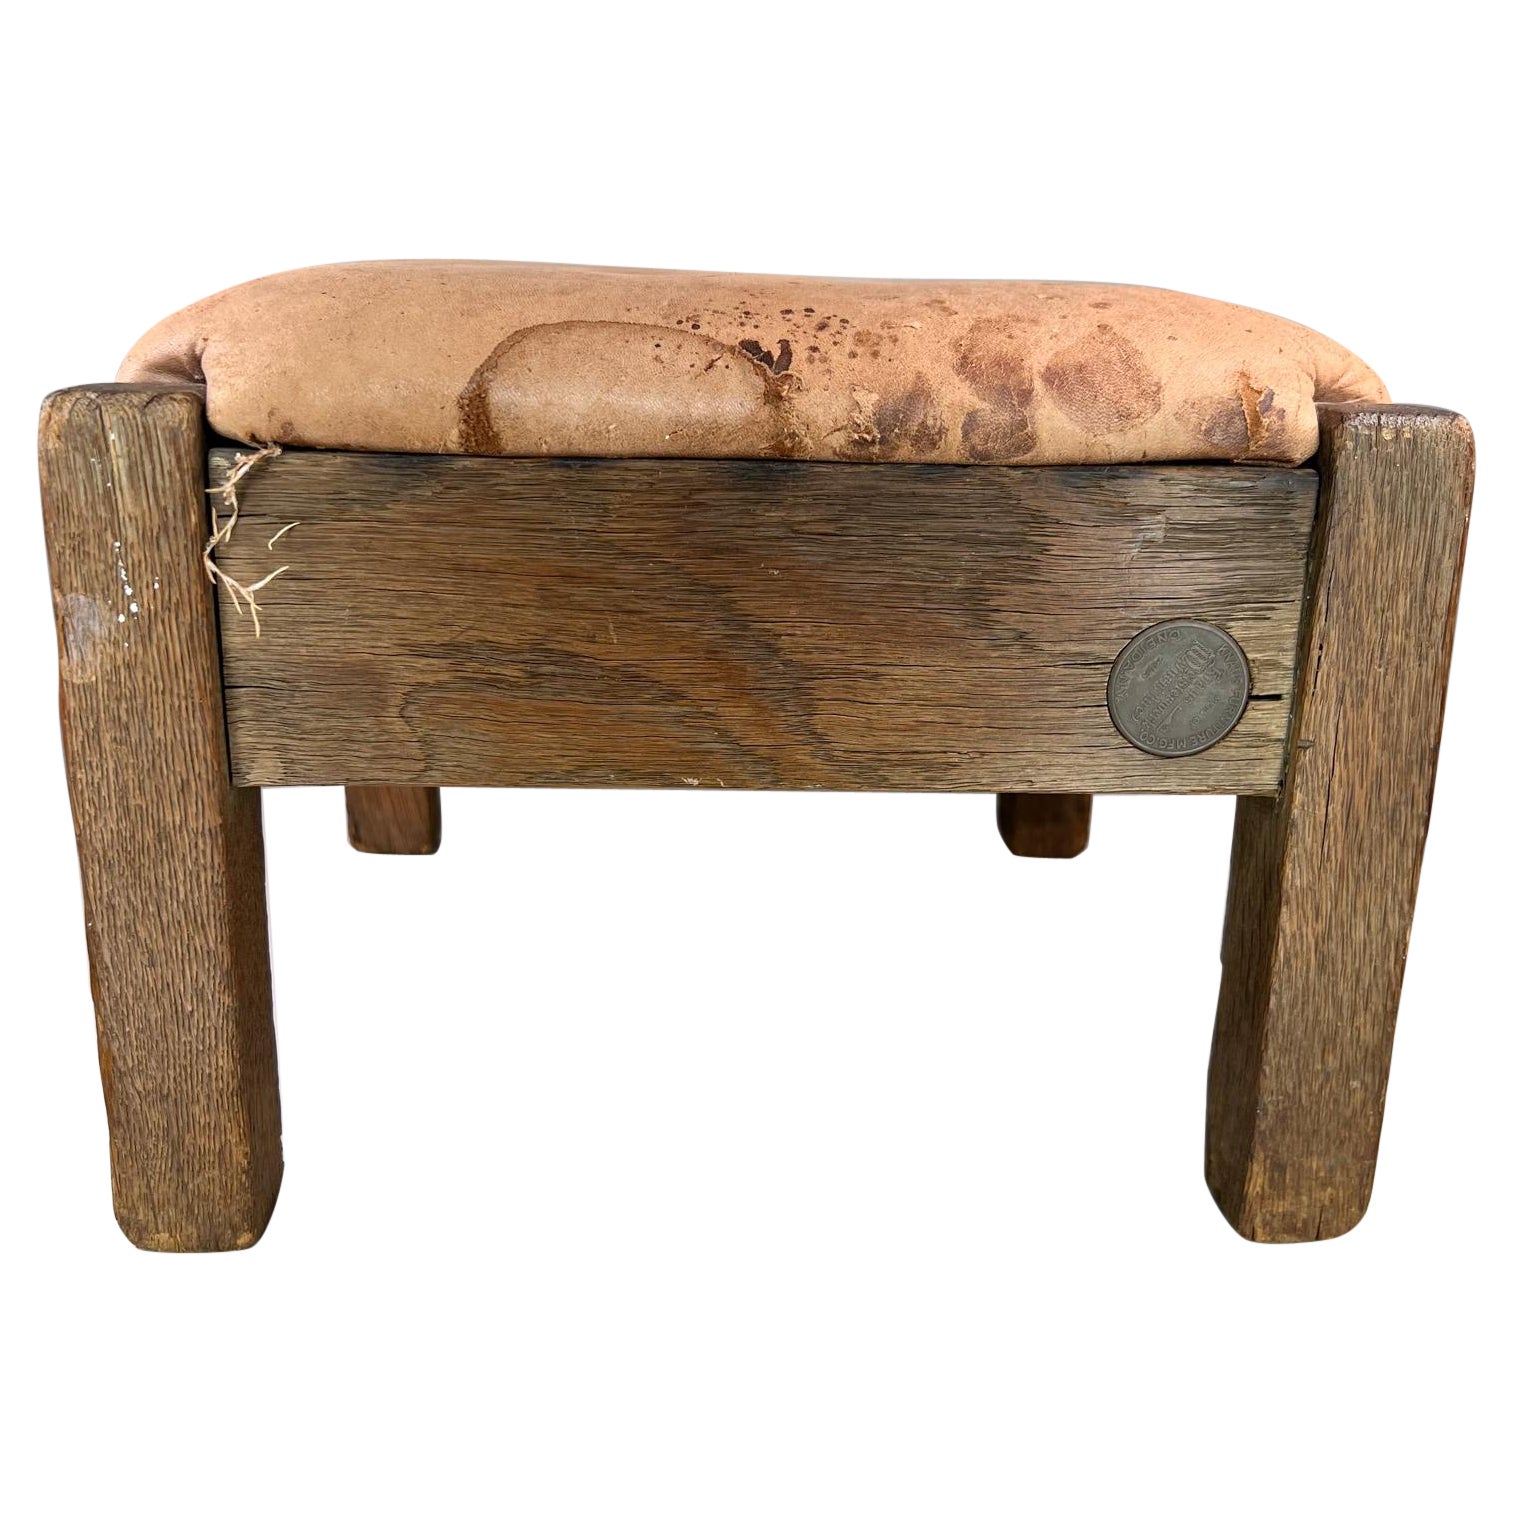 Knaus Mfg. Arts & Crafts Low Footstool in Distressed Leather and Wood Oneida, NY